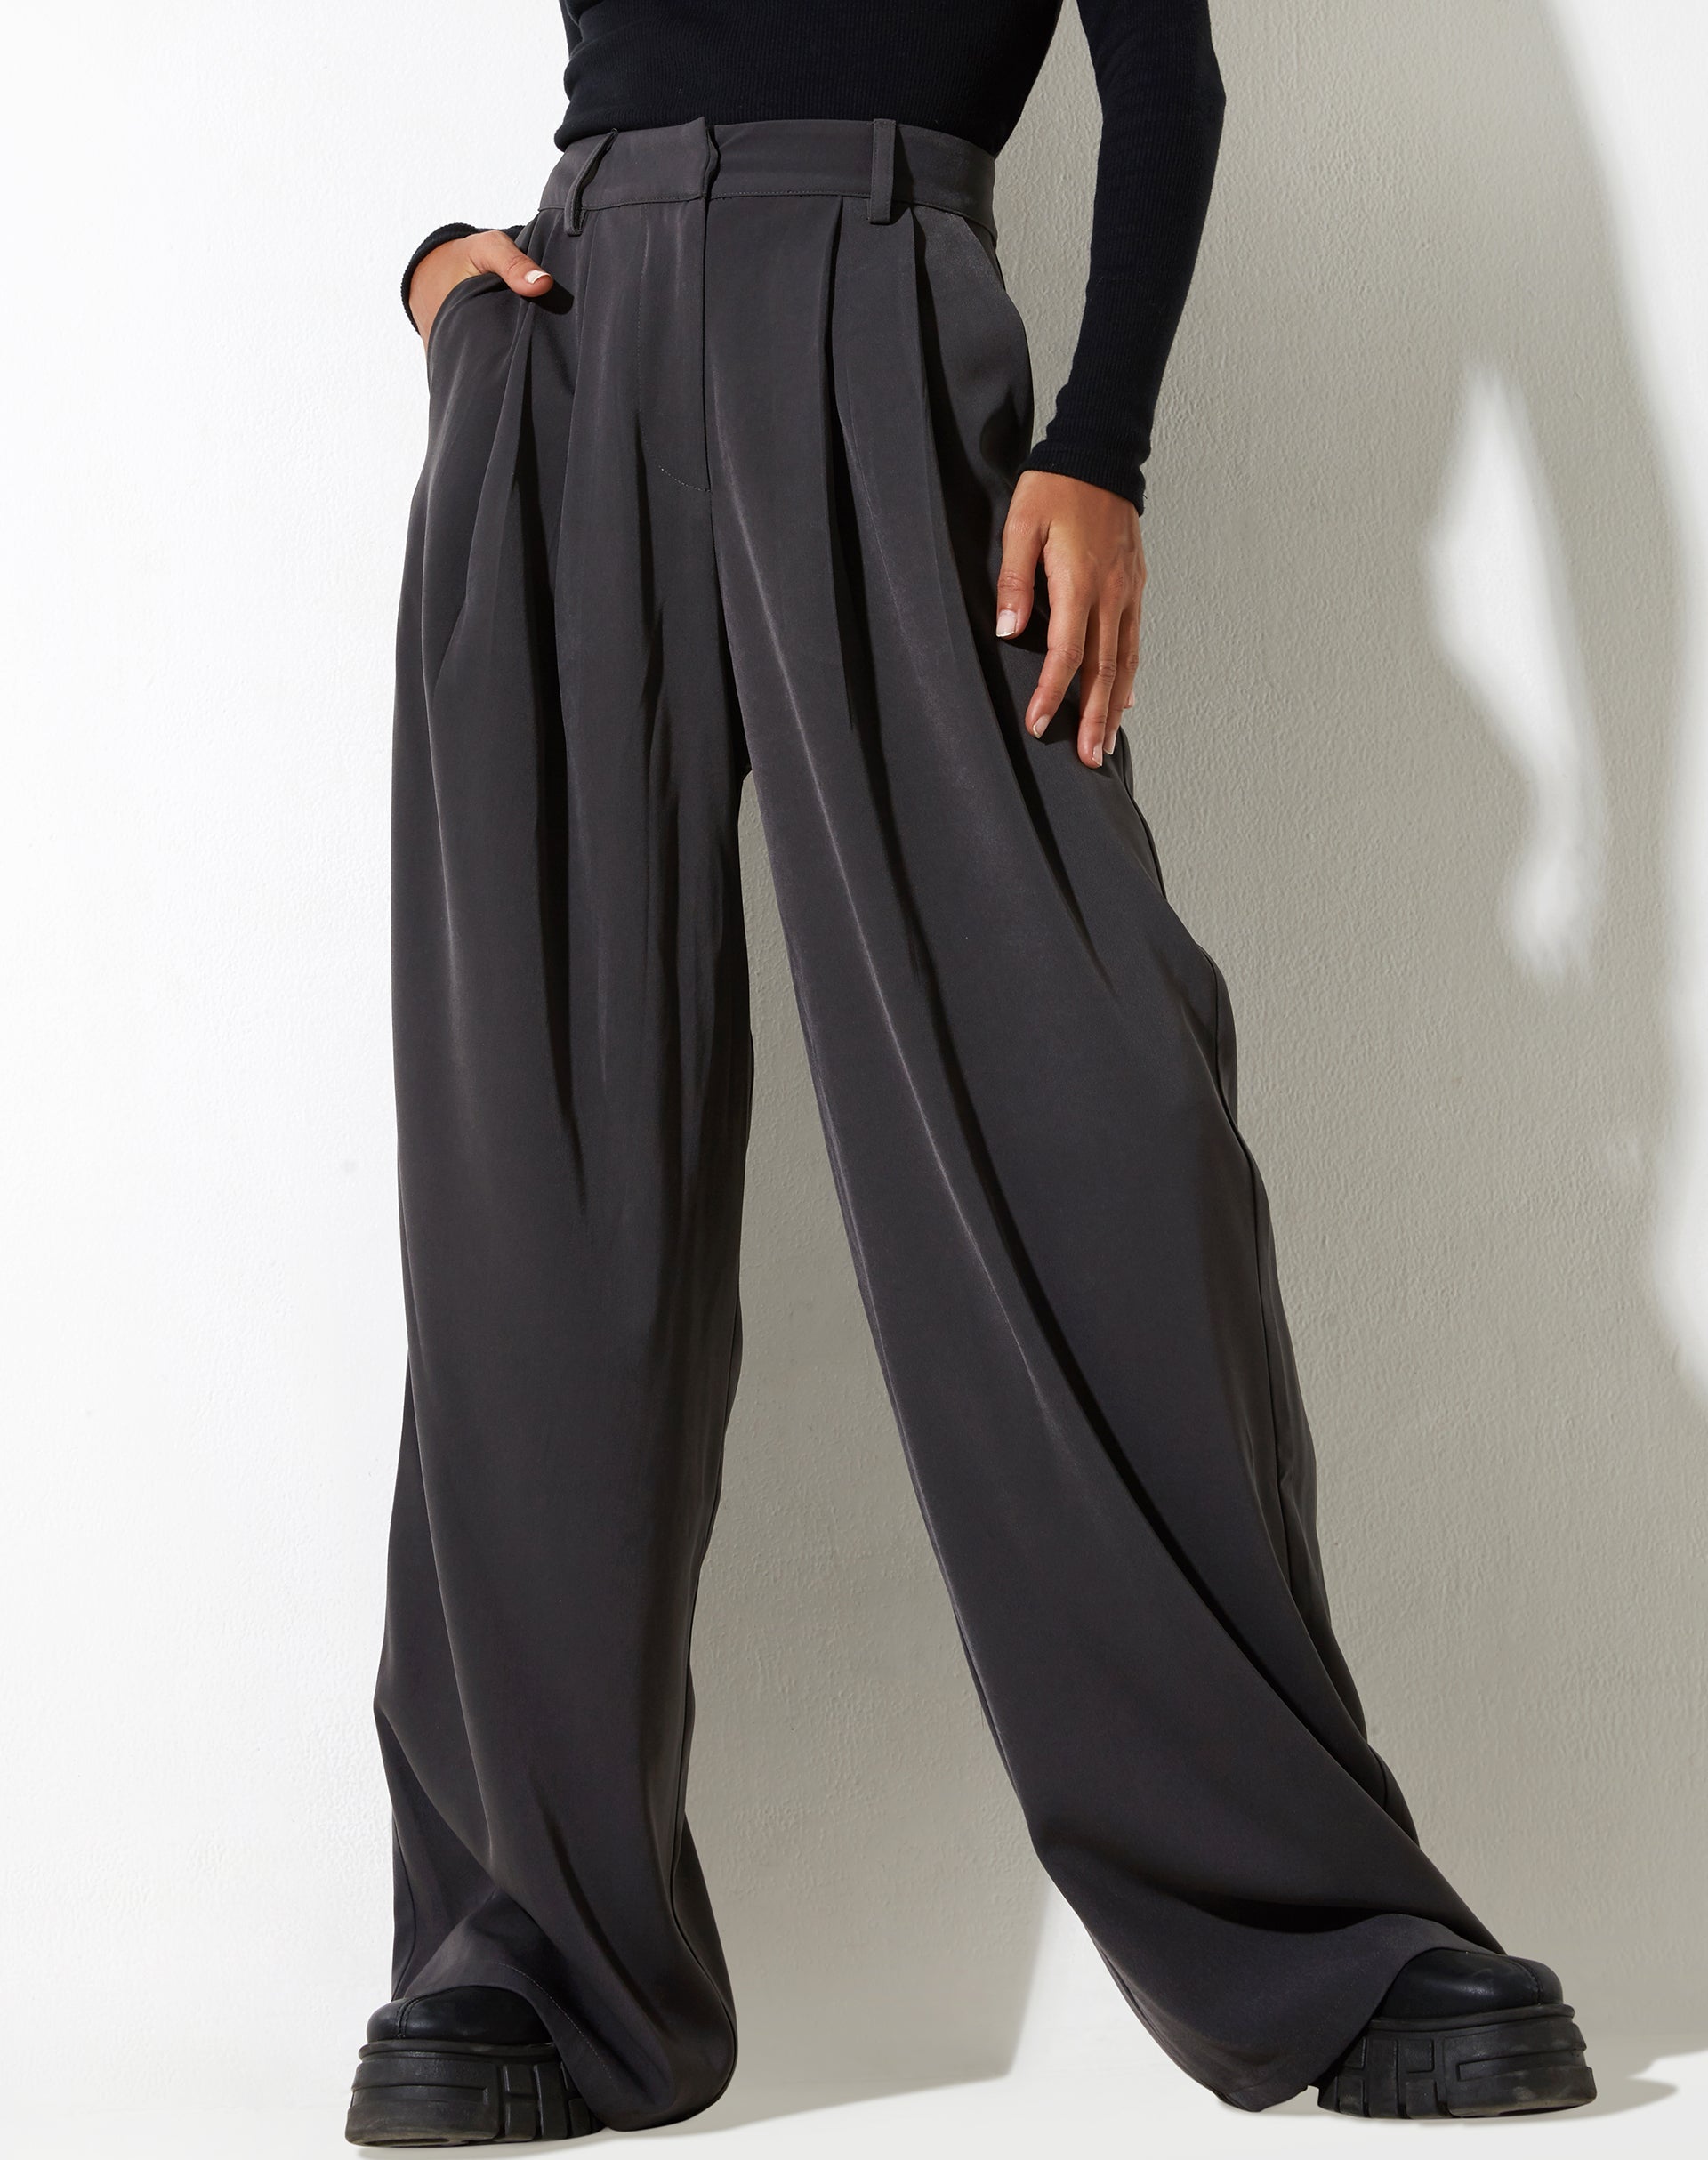 Yeka Trouser in Tailoring Charcoal